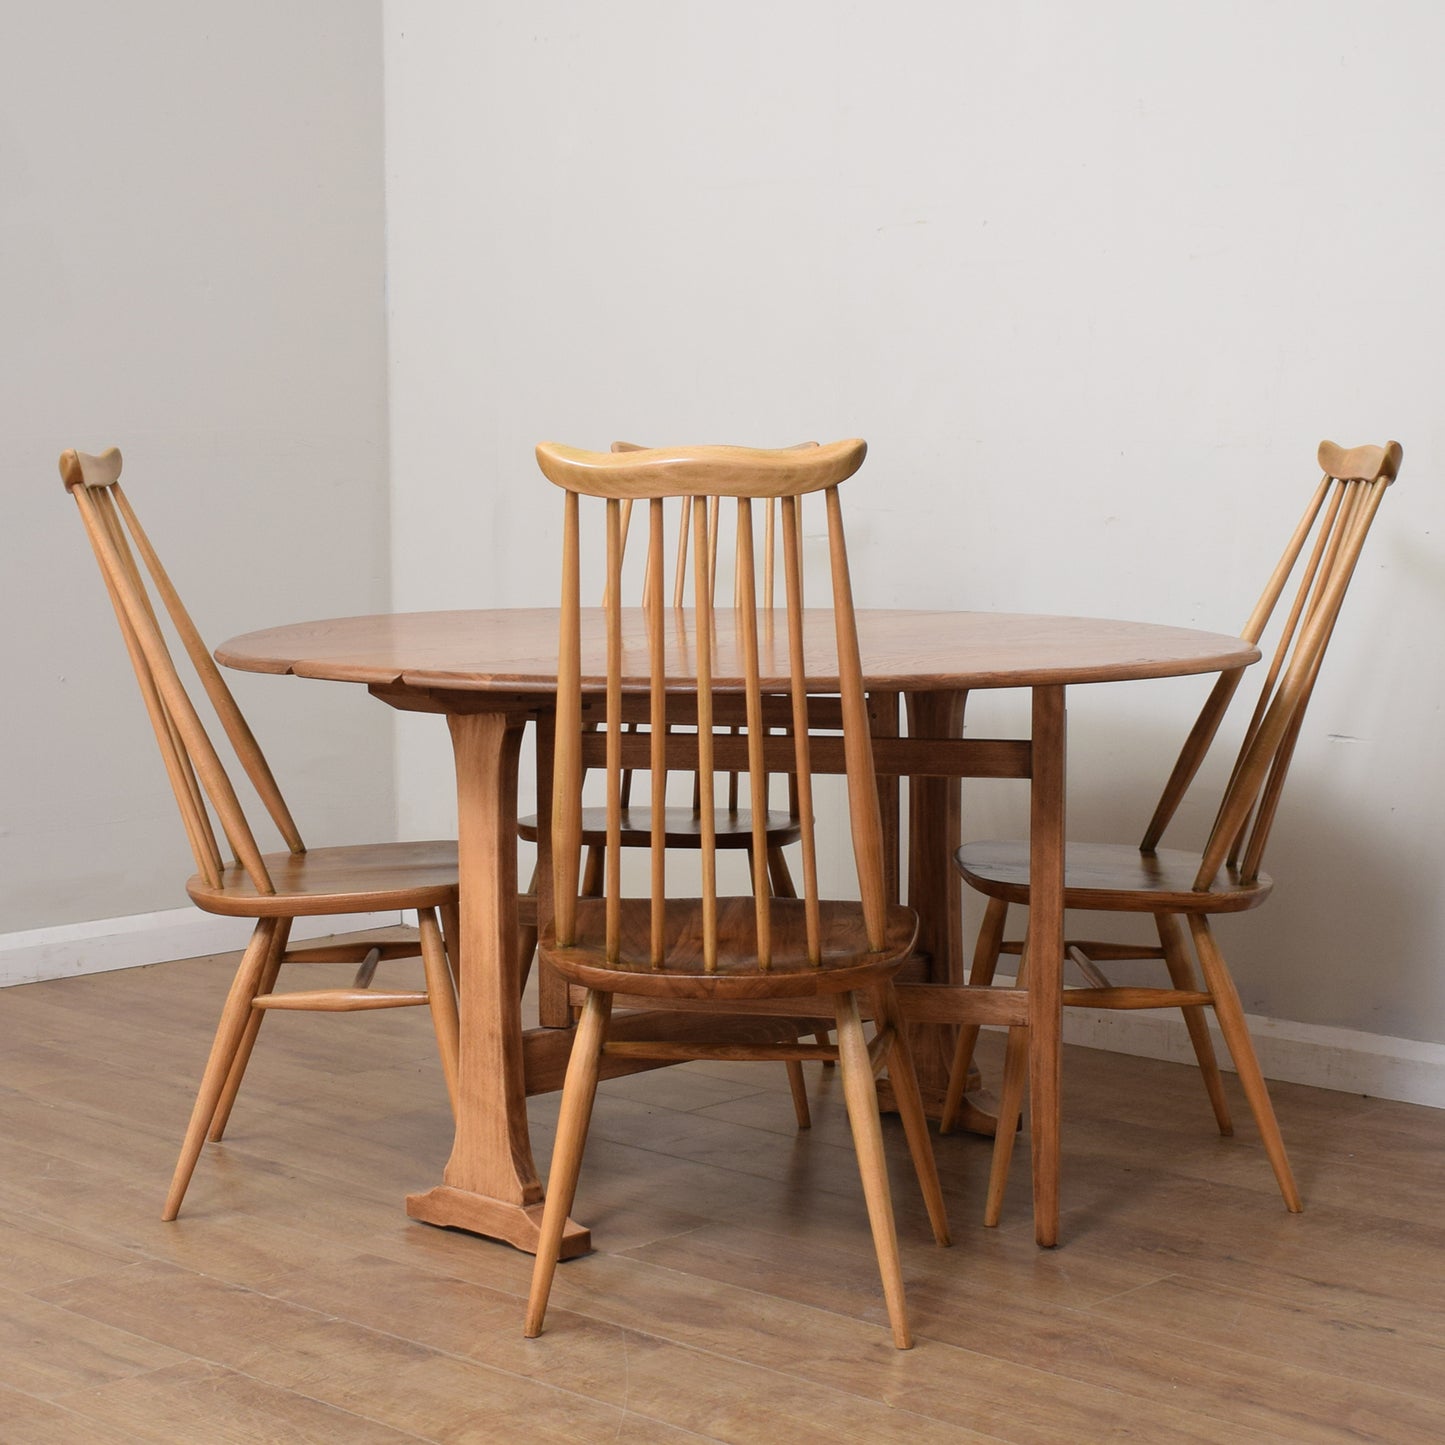 Restored Vintage Ercol Table And Four Chairs